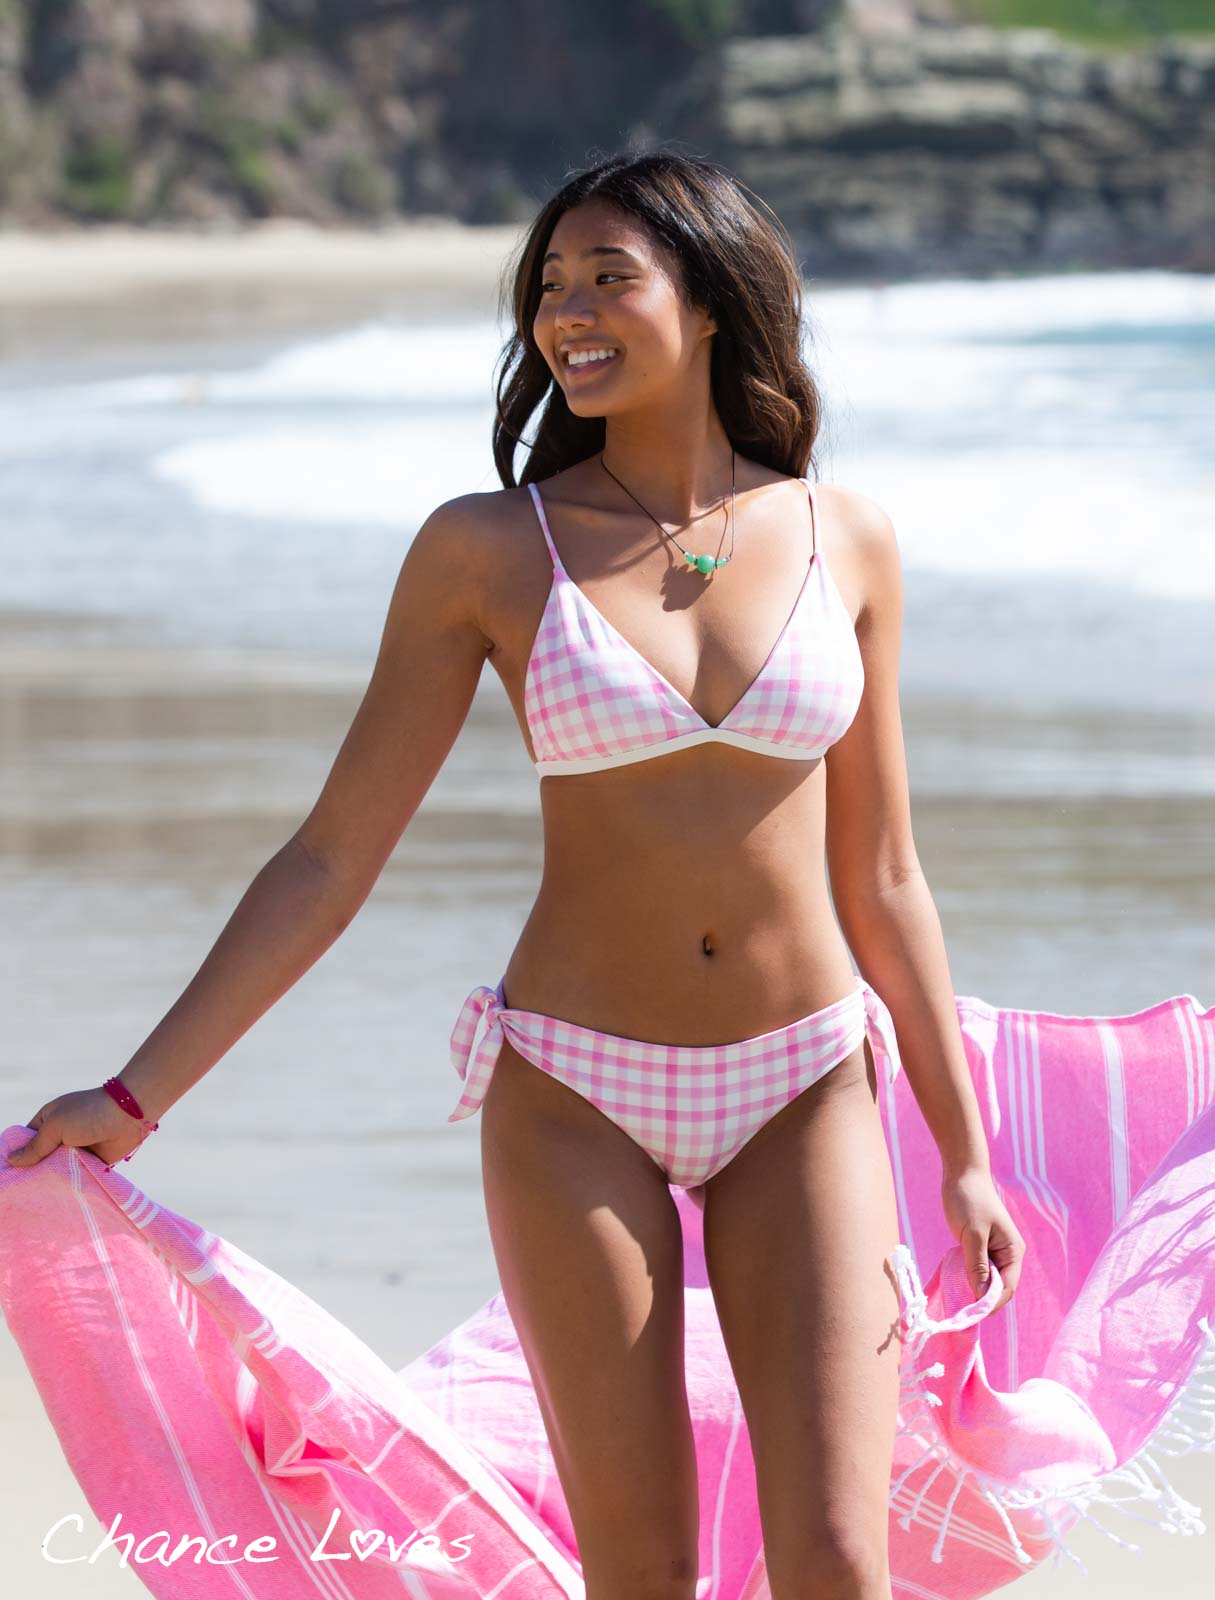 A smiling 19 year old girl walking on the beach in Laguna three arch bay wearing a gingham style pink and white swimsuit by Chance Loves